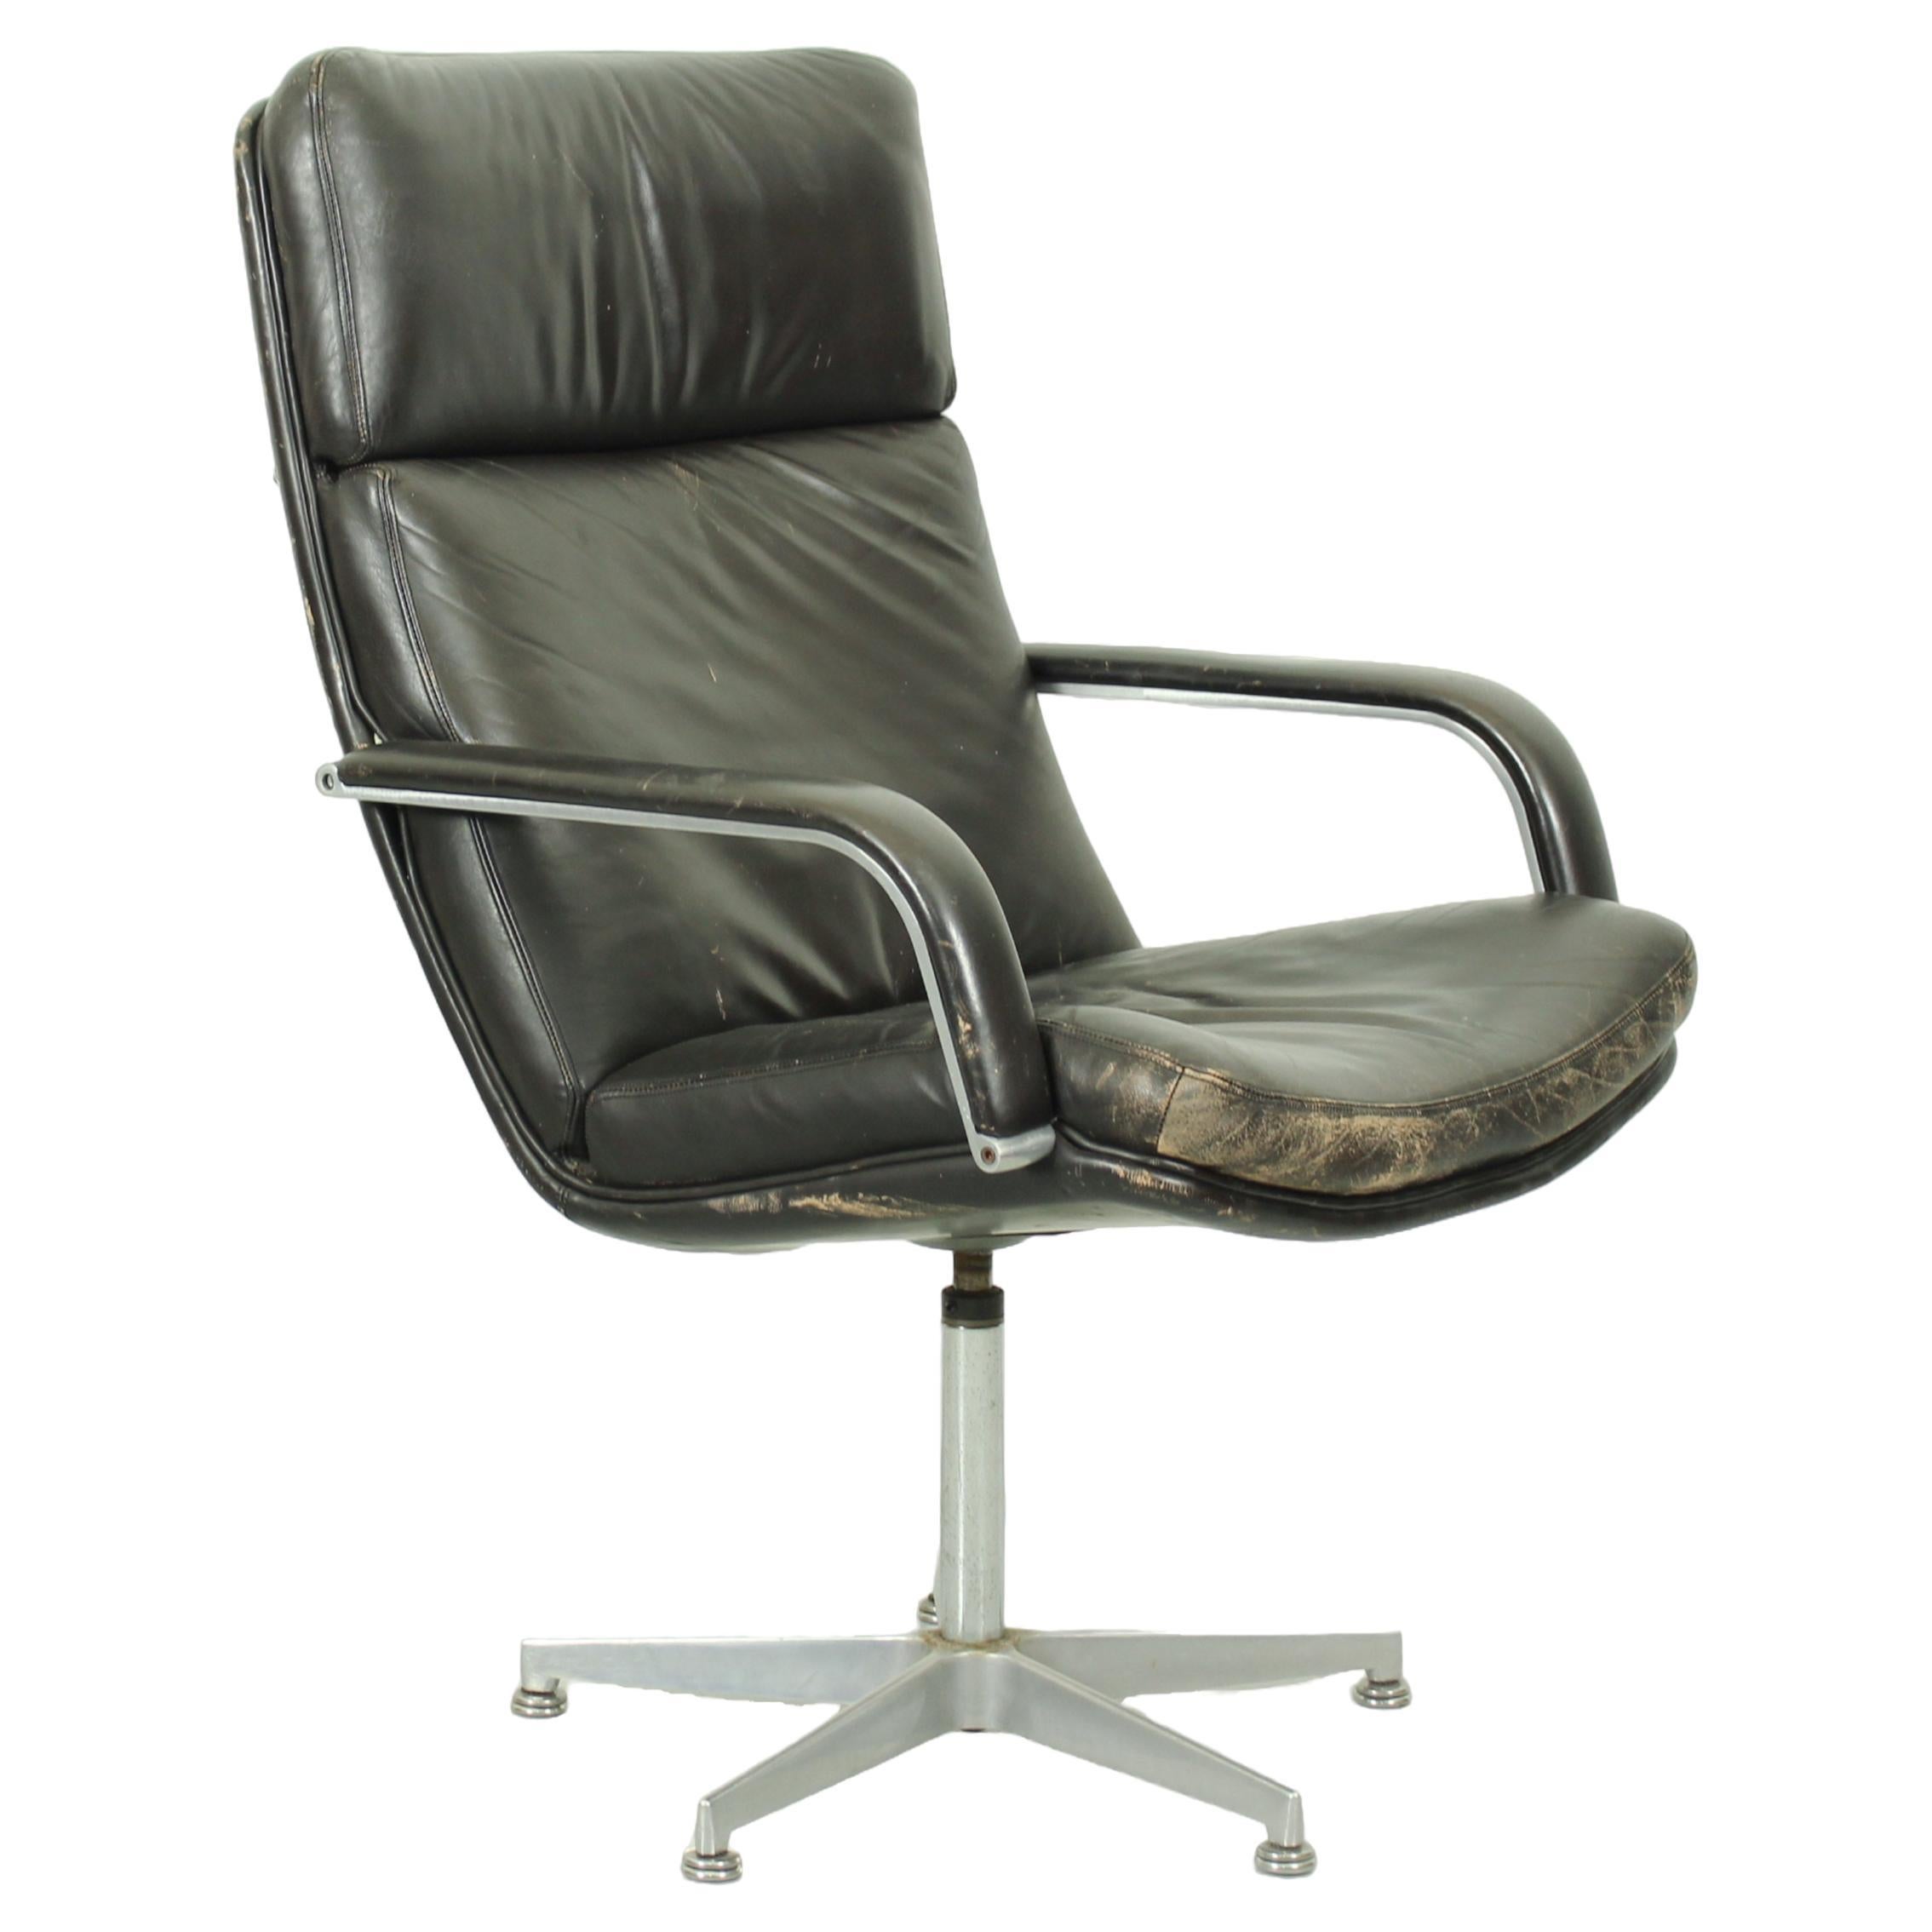 Artifort executive desk chair by Geoffrey Harcourt, 1970s For Sale